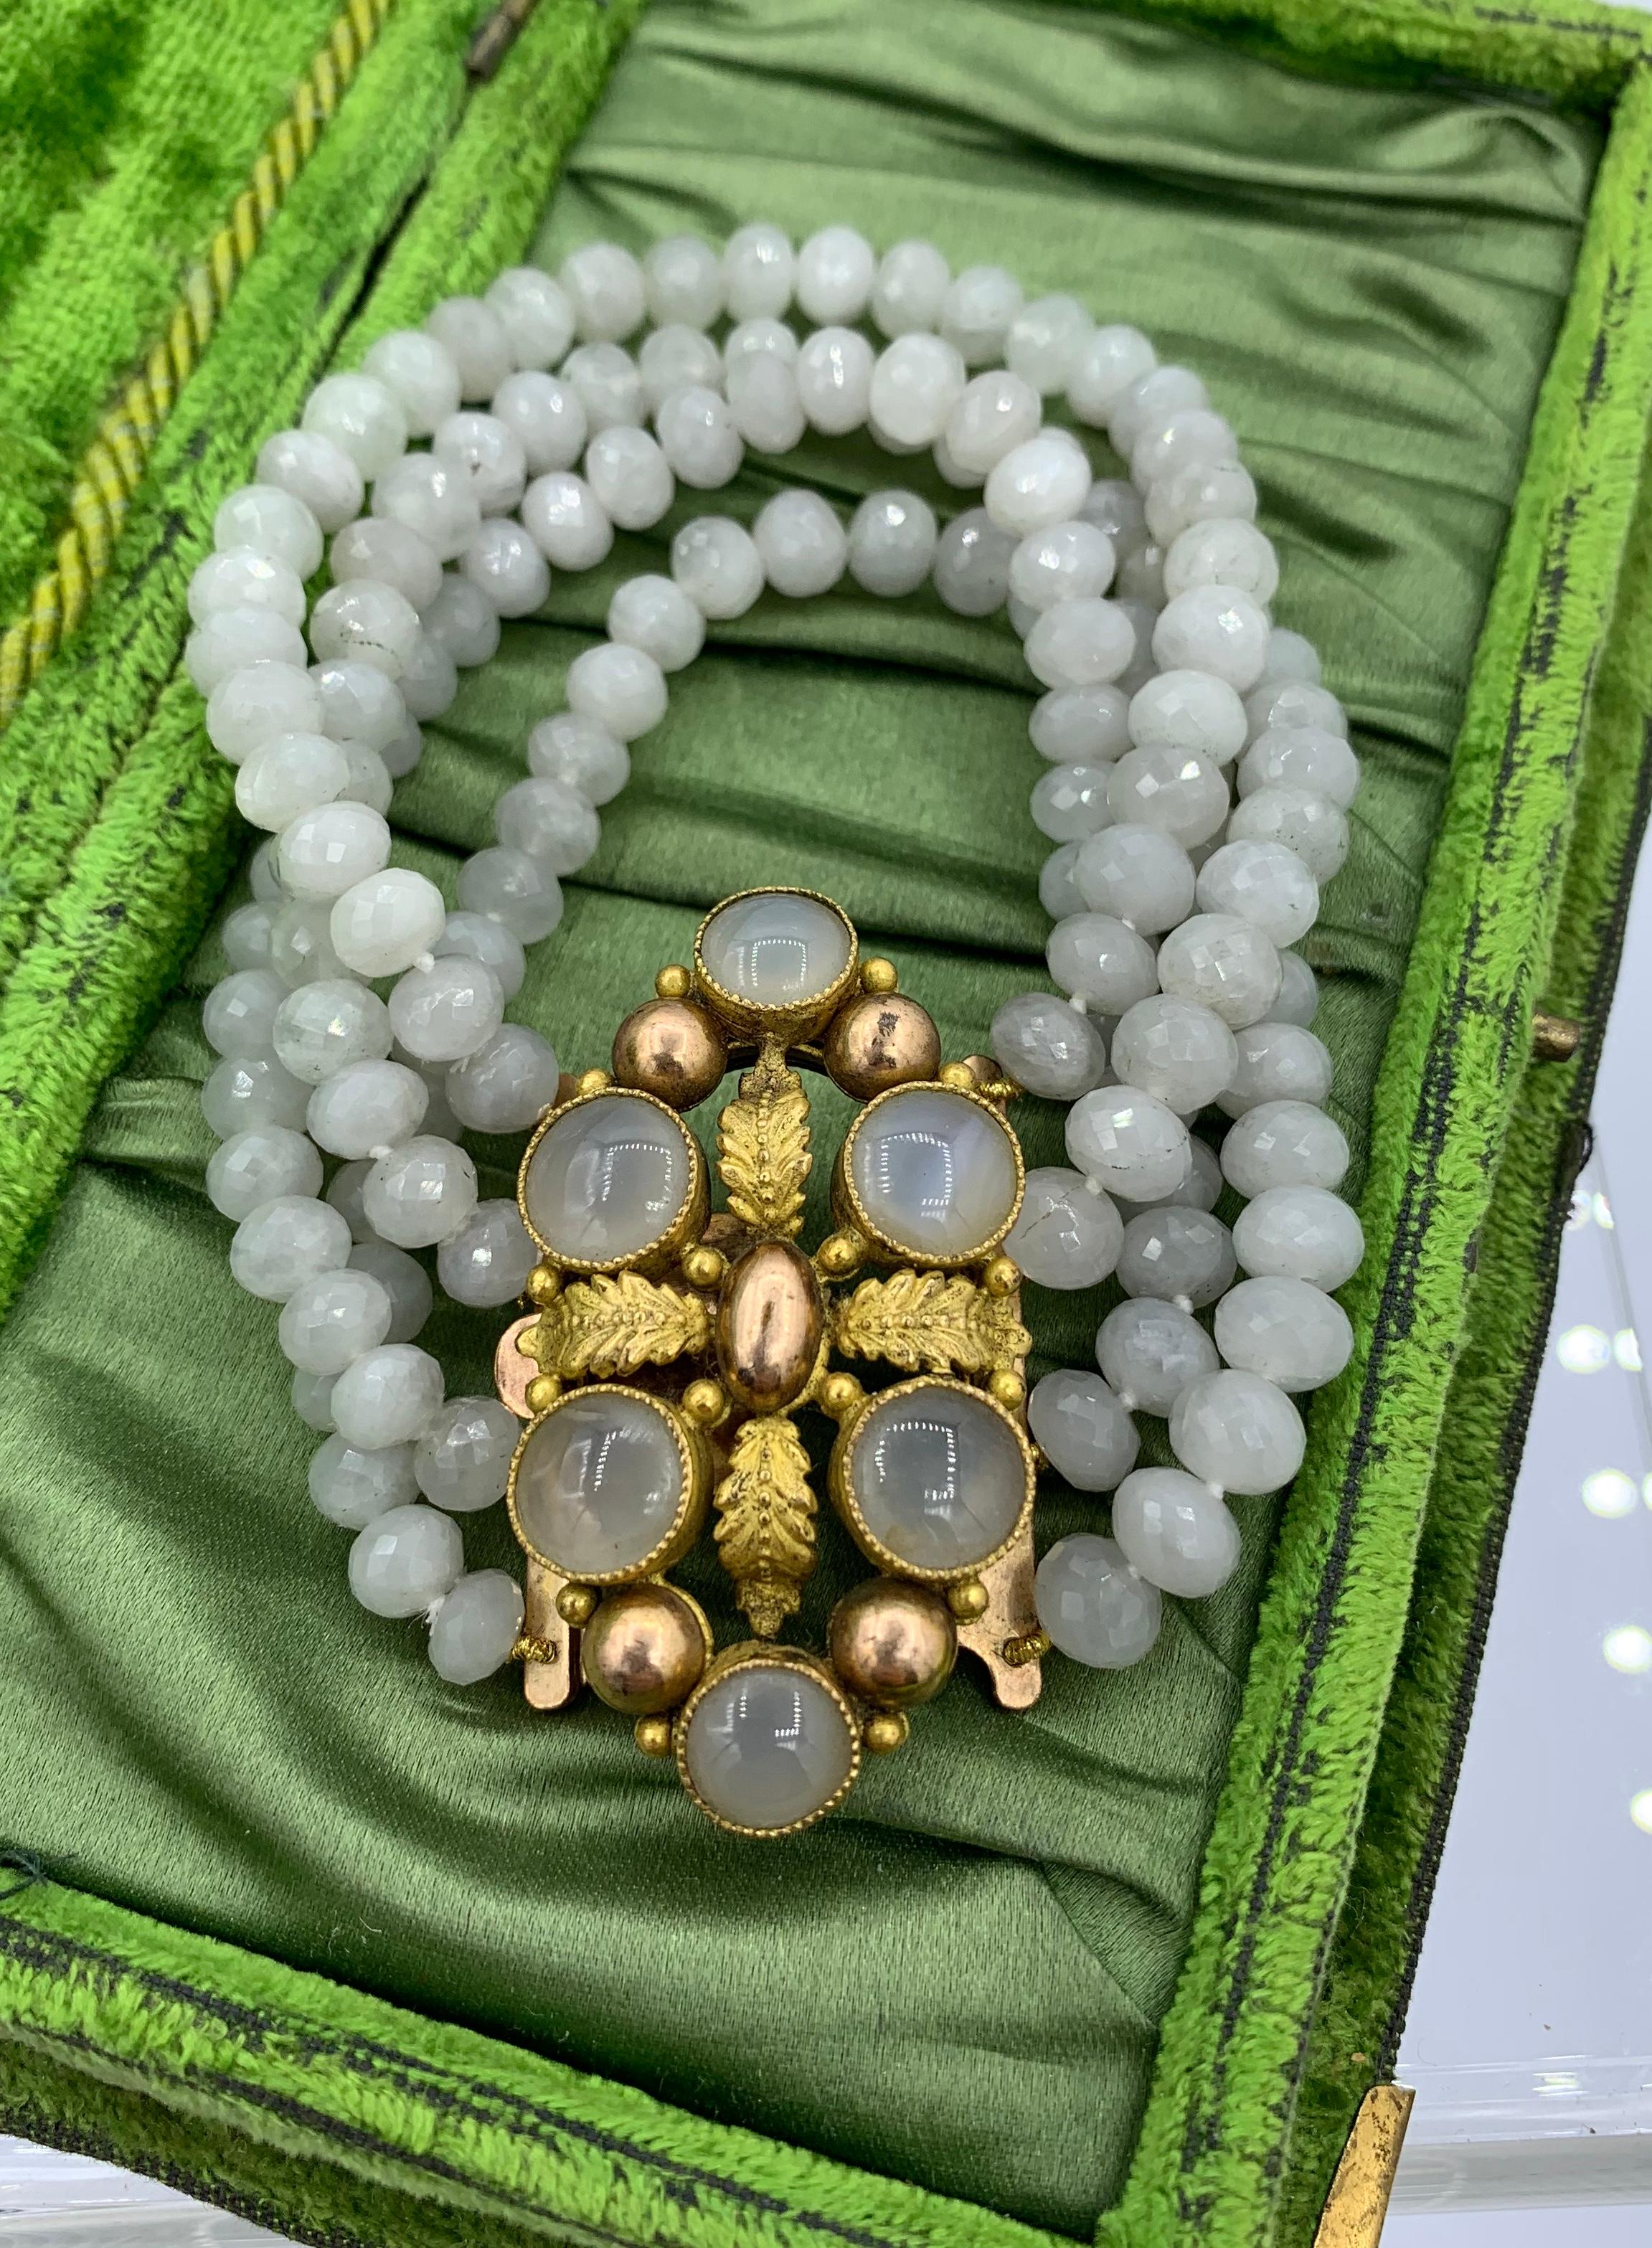 This is a stunning early antique French Georgian - Napoleon III Bracelet with a spectacular Pinchbeck center clasp set with White Agate gems with a four strand faceted white agate bead band.  The translucent stones are magnificent when held to the